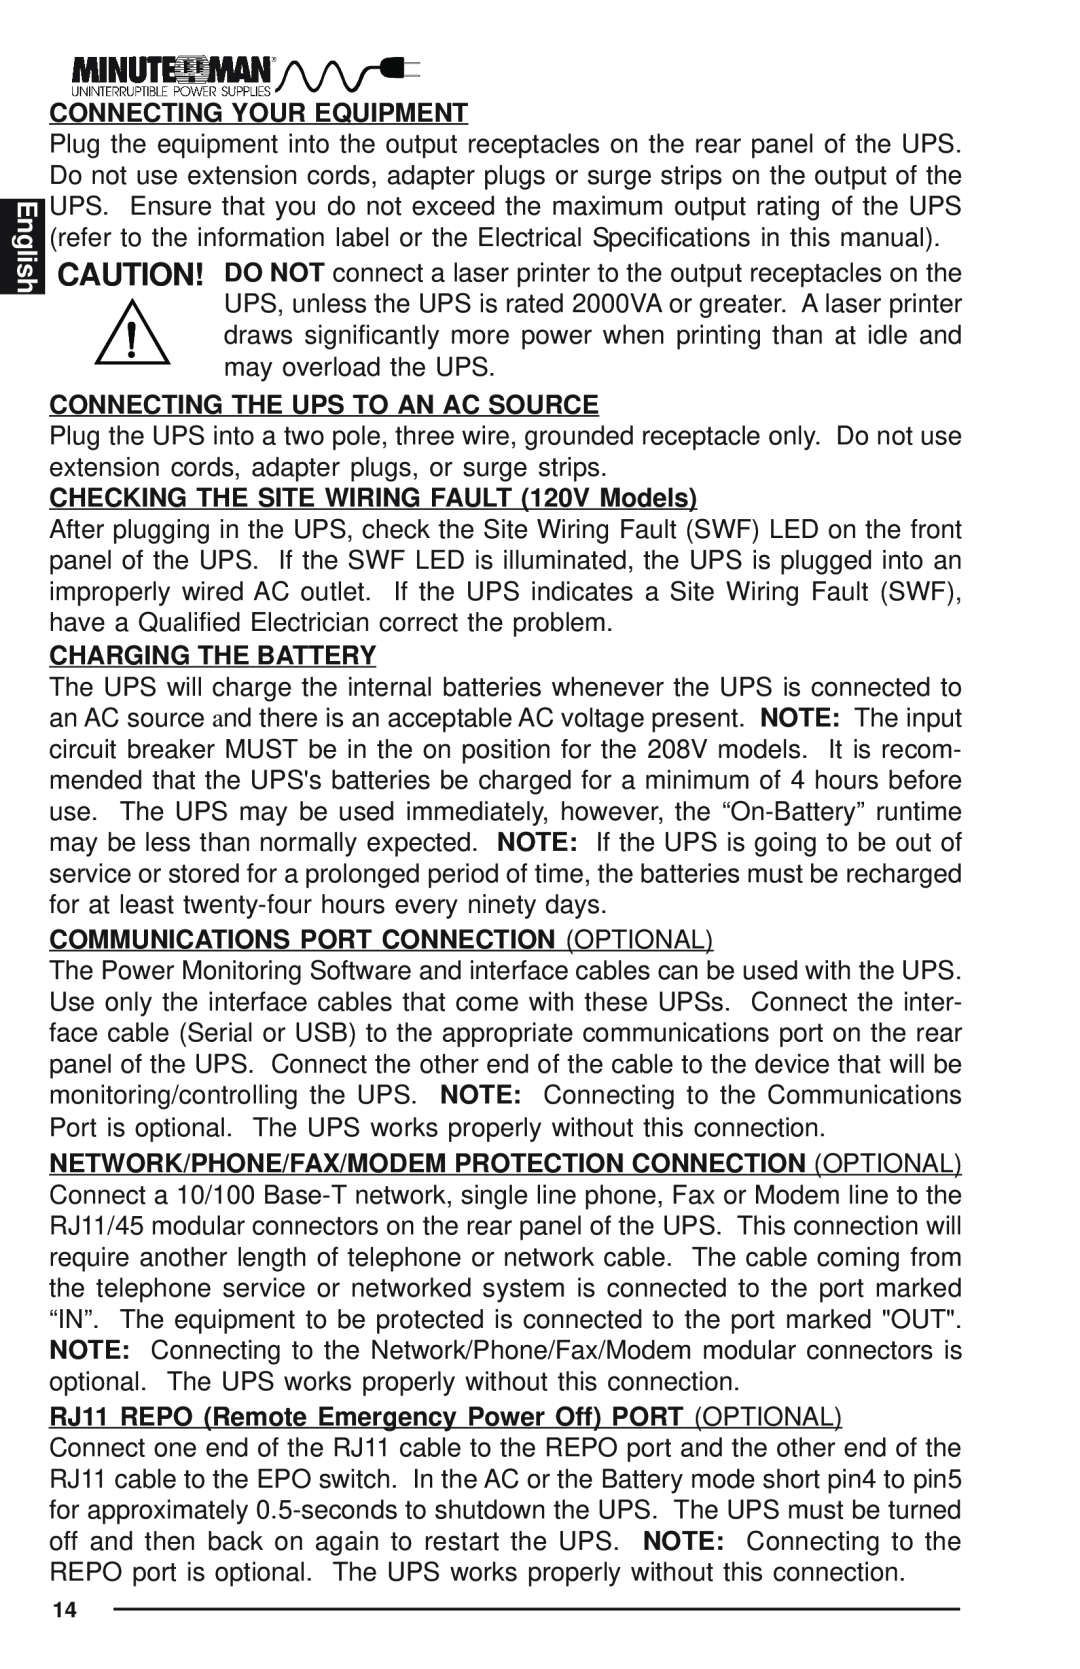 Minuteman UPS Enterprise Plus Series user manual English, Connecting Your Equipment, Connecting The Ups To An Ac Source 